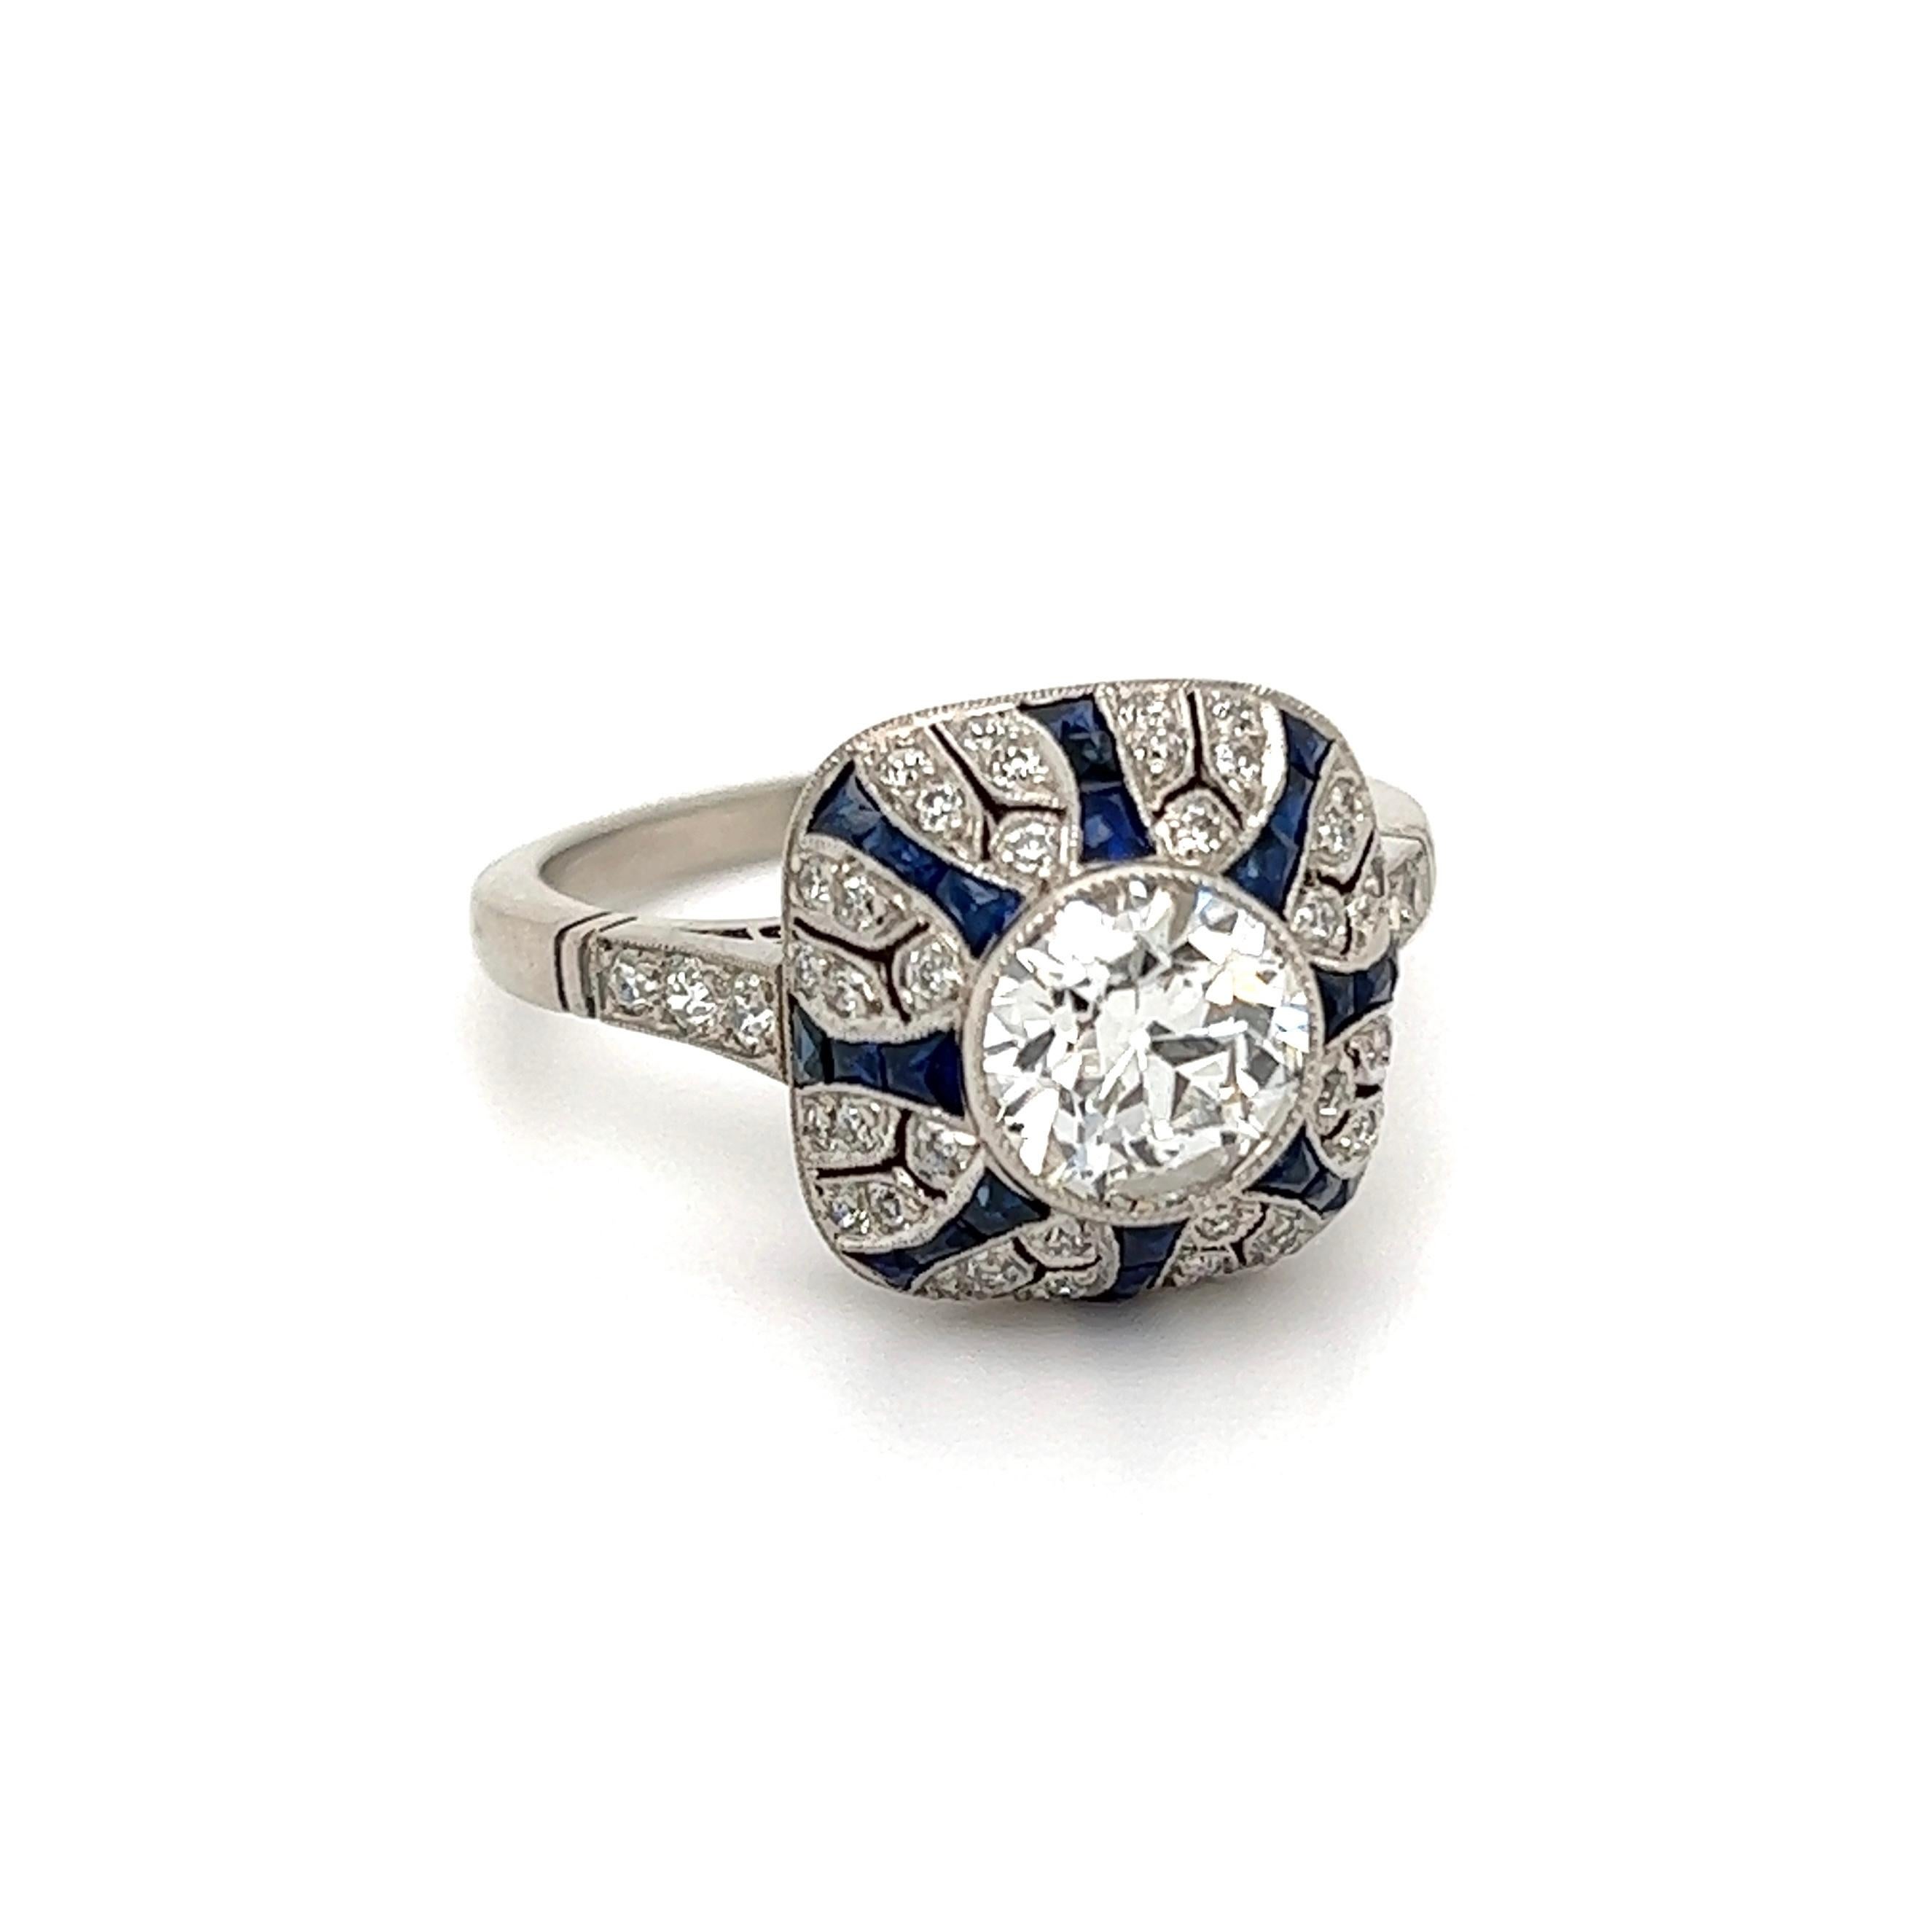 Simply Beautiful! Finely detailed Cocktail Ring, center securely Hand set with an Old European Cut Diamond, approx. total carat weight of Diamonds 1.10 Carats, accented by Sapphires weighing approx. 1.30tcw and Diamonds, approx. 0.78tcw. Hand